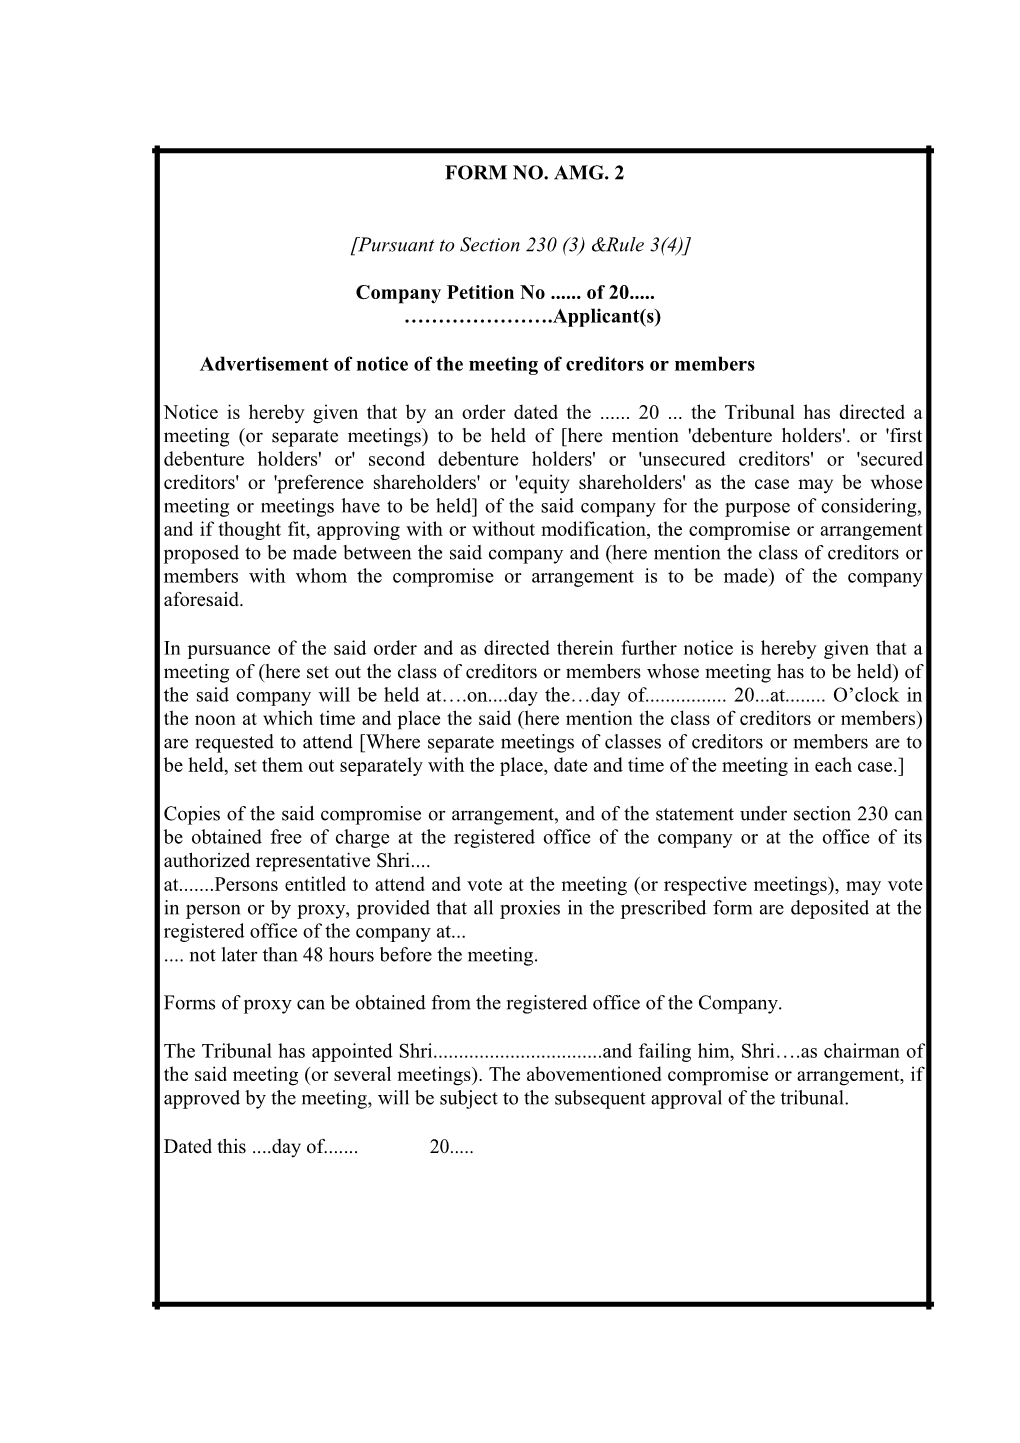 Advertisement of Notice of the Meeting of Creditors Or Members